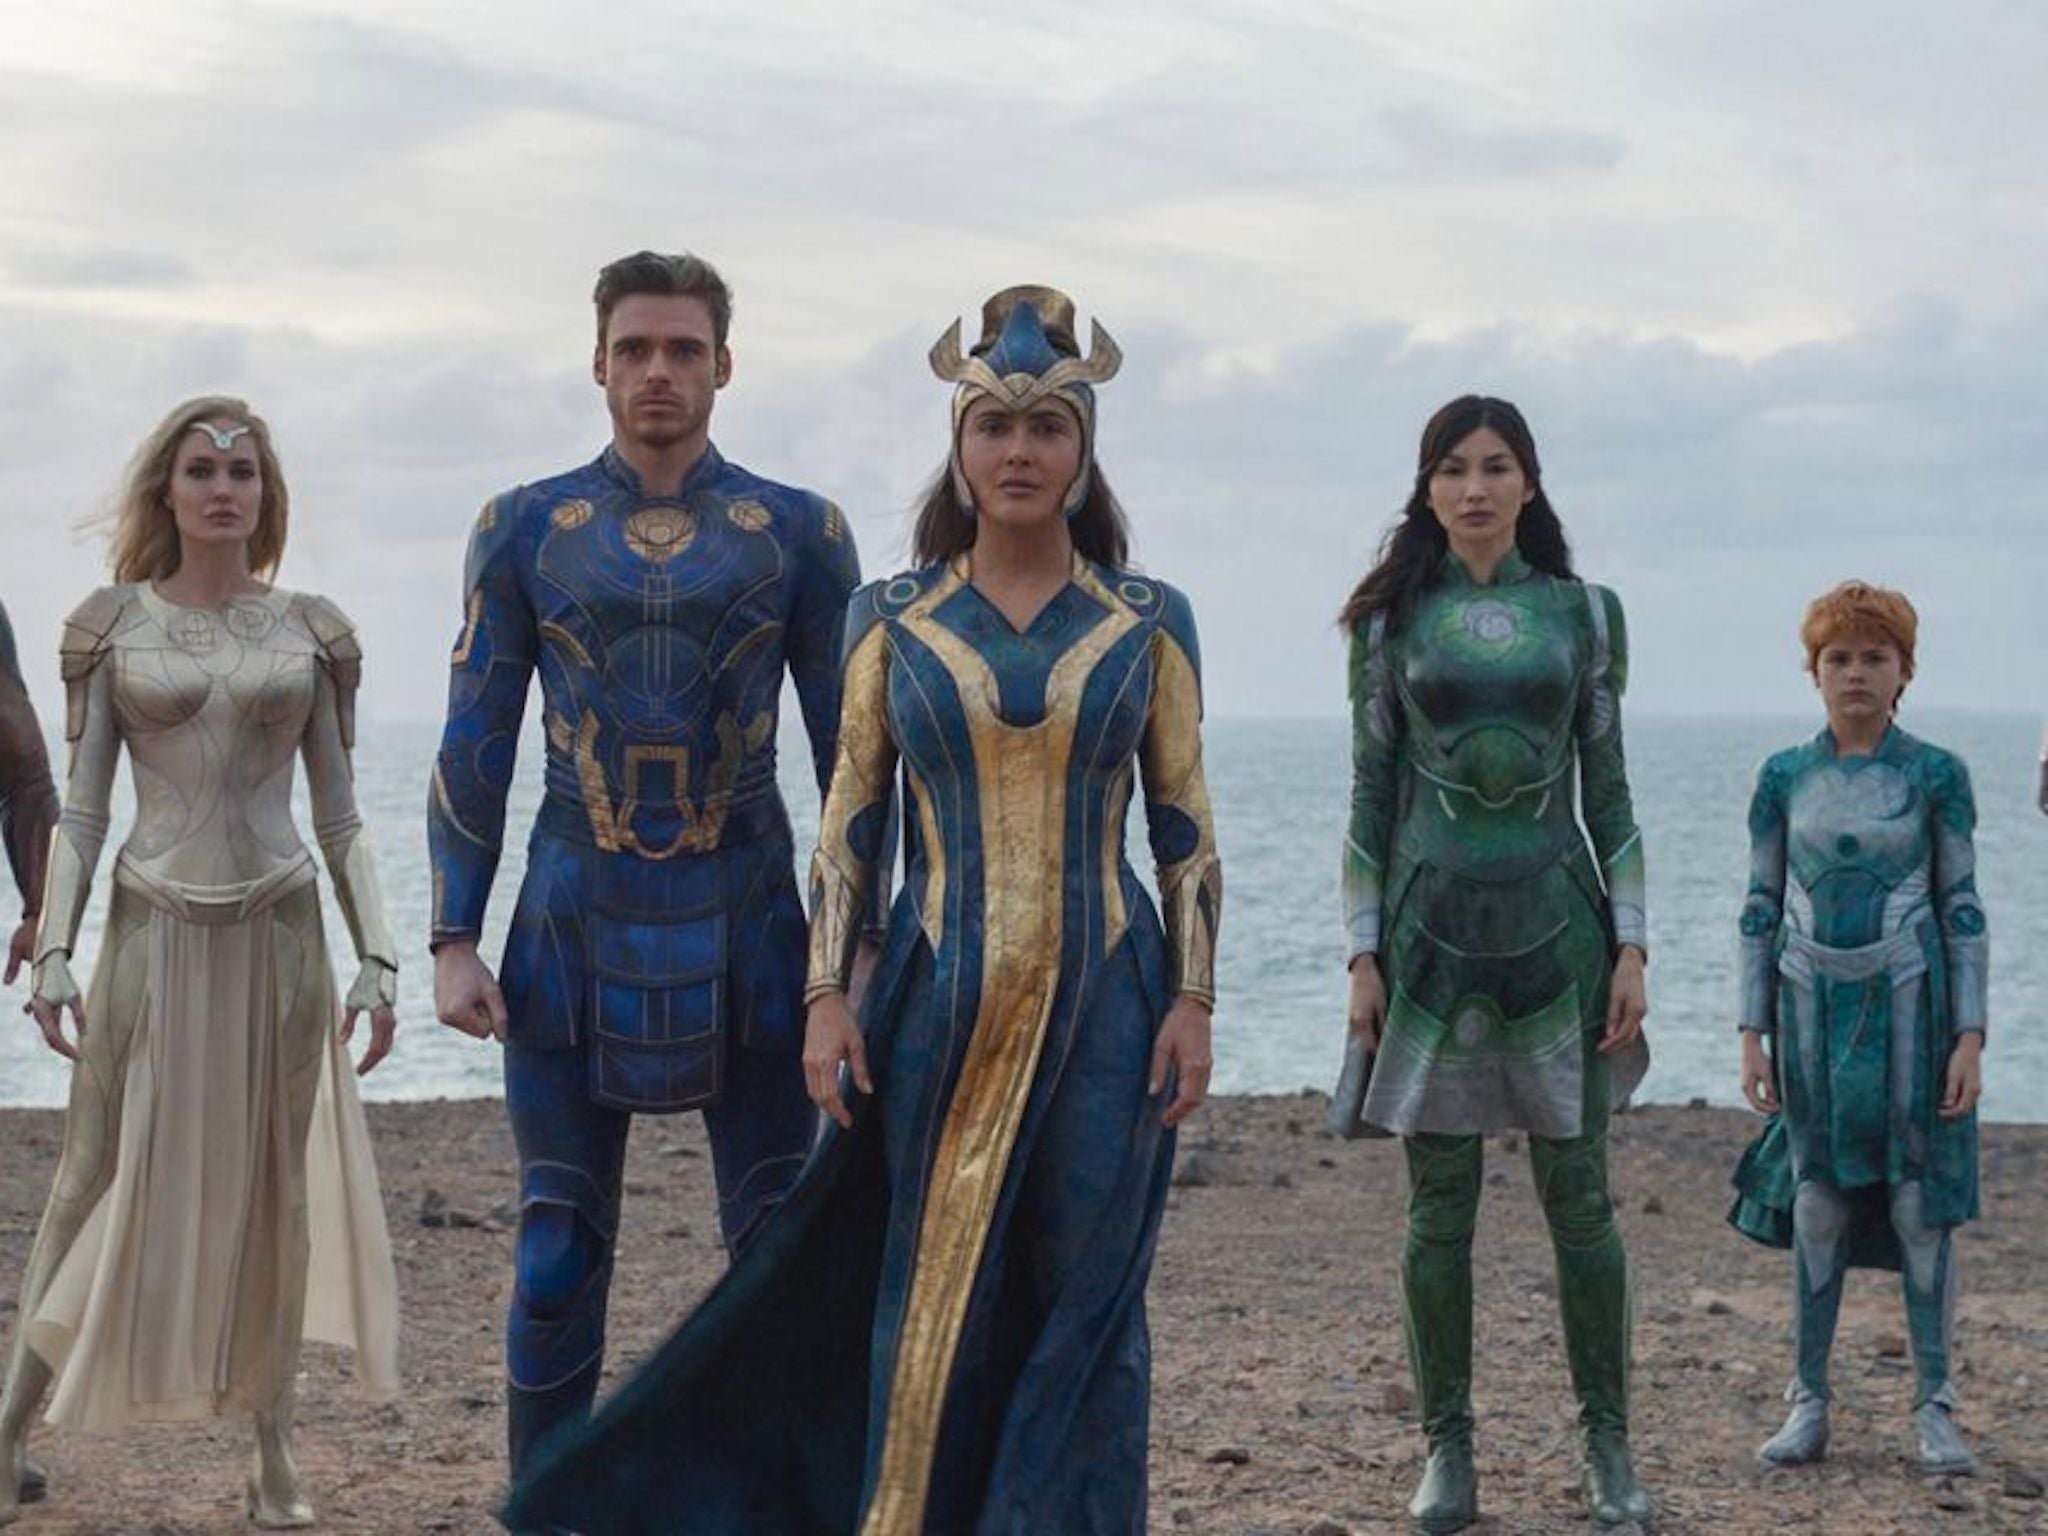 ‘Eternals’ has received the lowest Rotten Tomatoes rating of any Marvel film ever